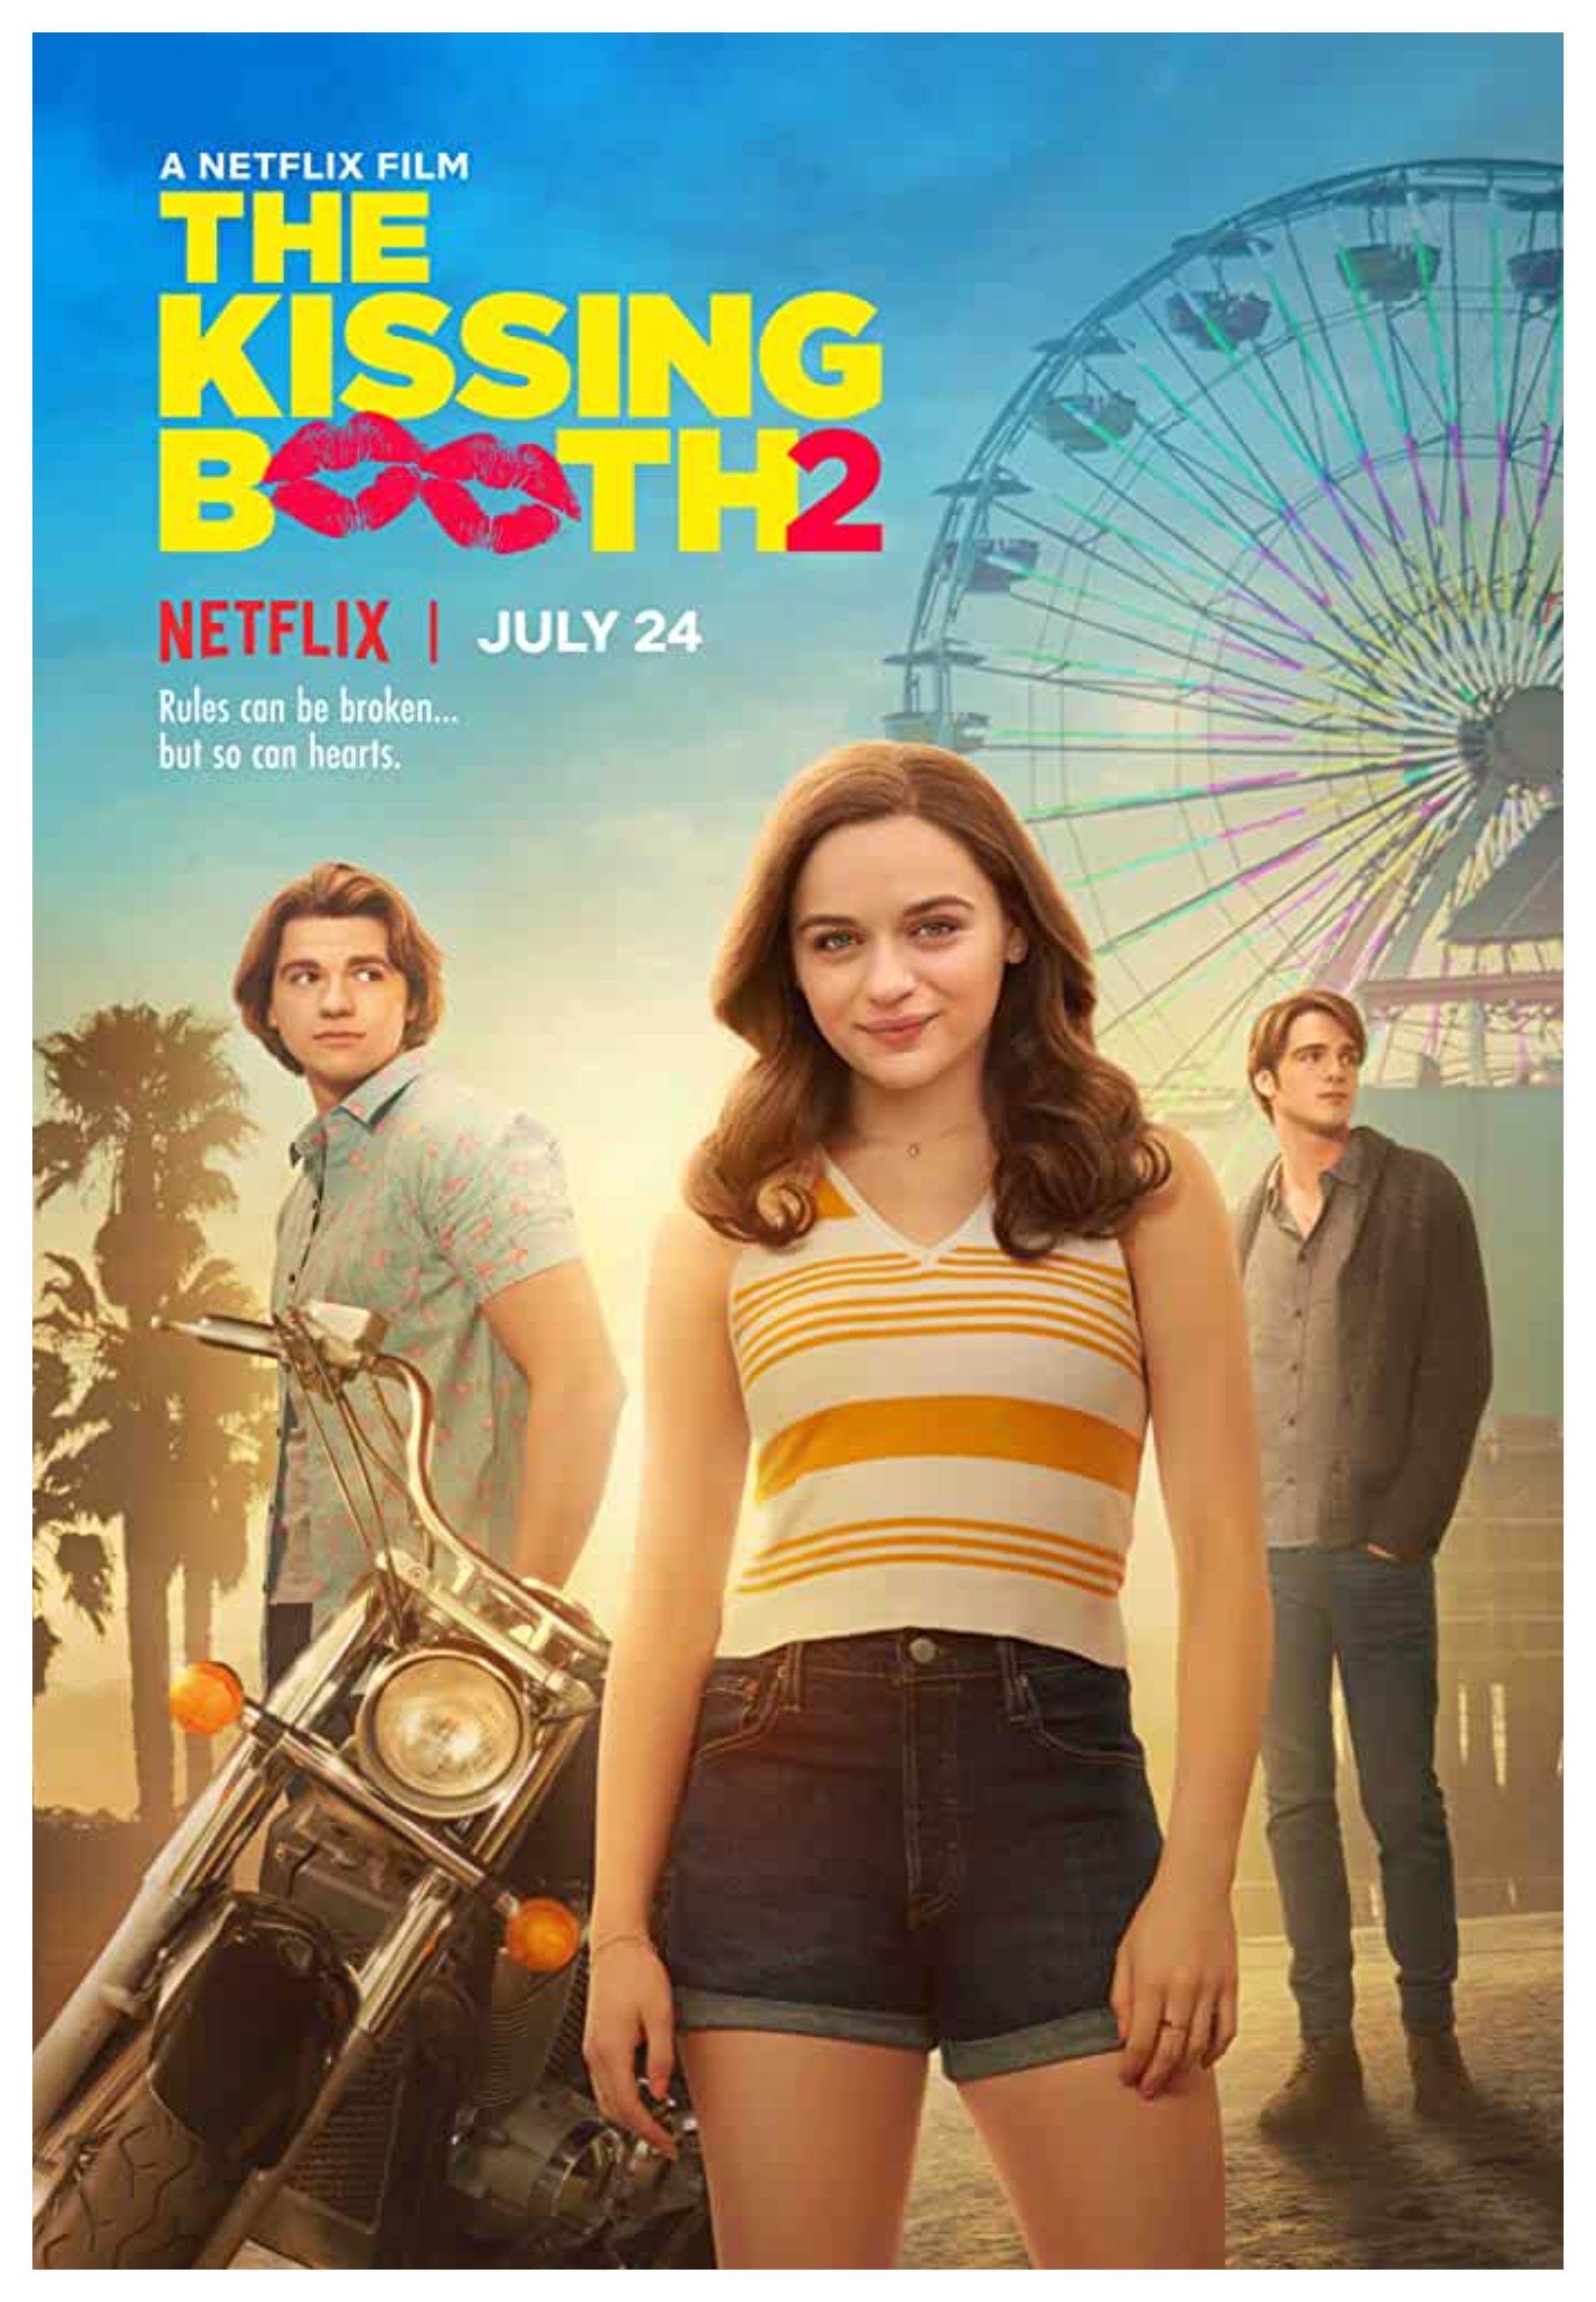 The Kissing Booth 2 review